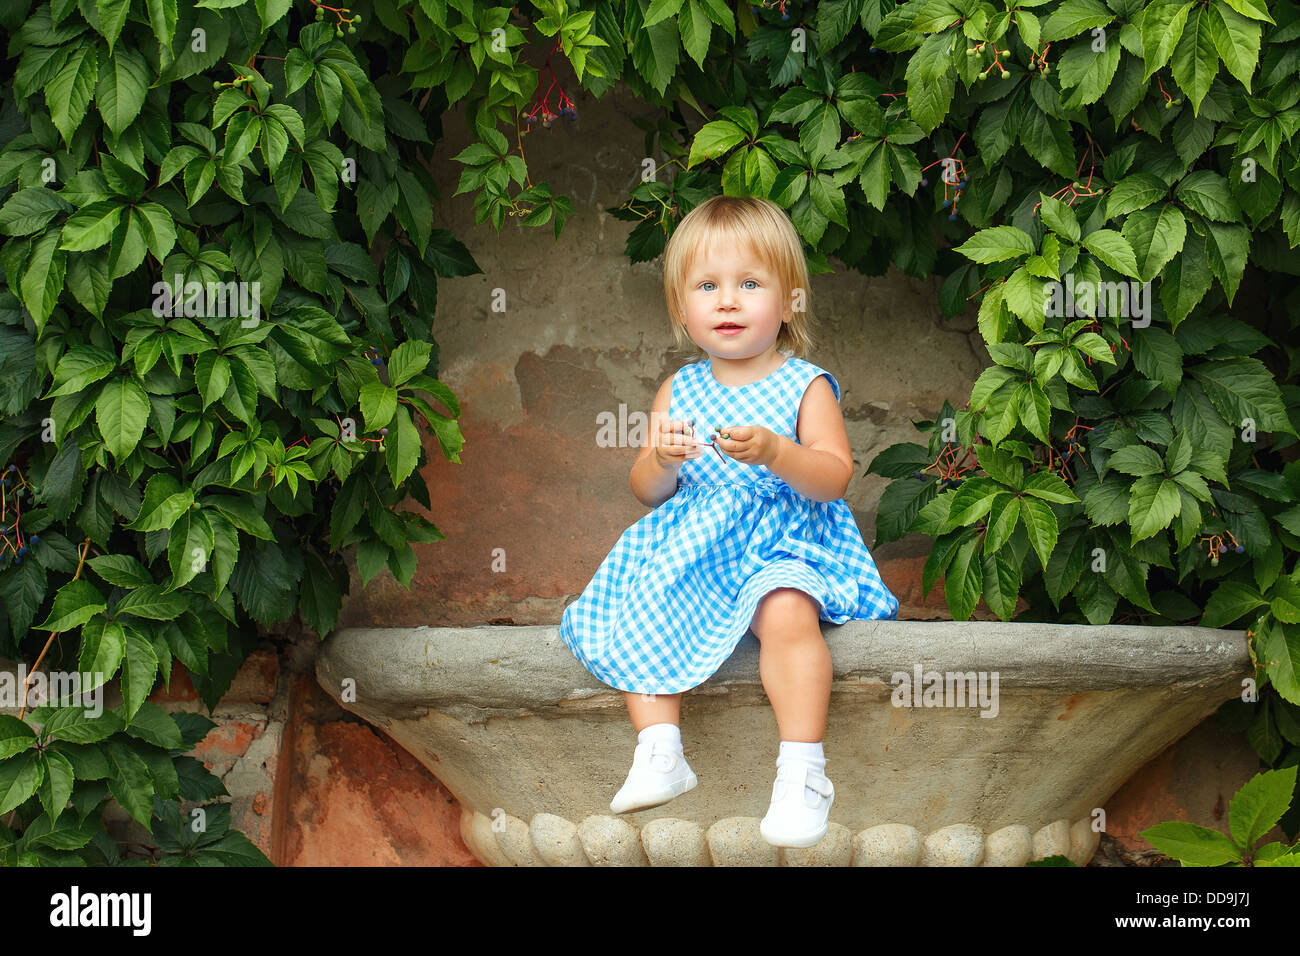 Little blonde girl on a background of green grape leaves Stock Photo